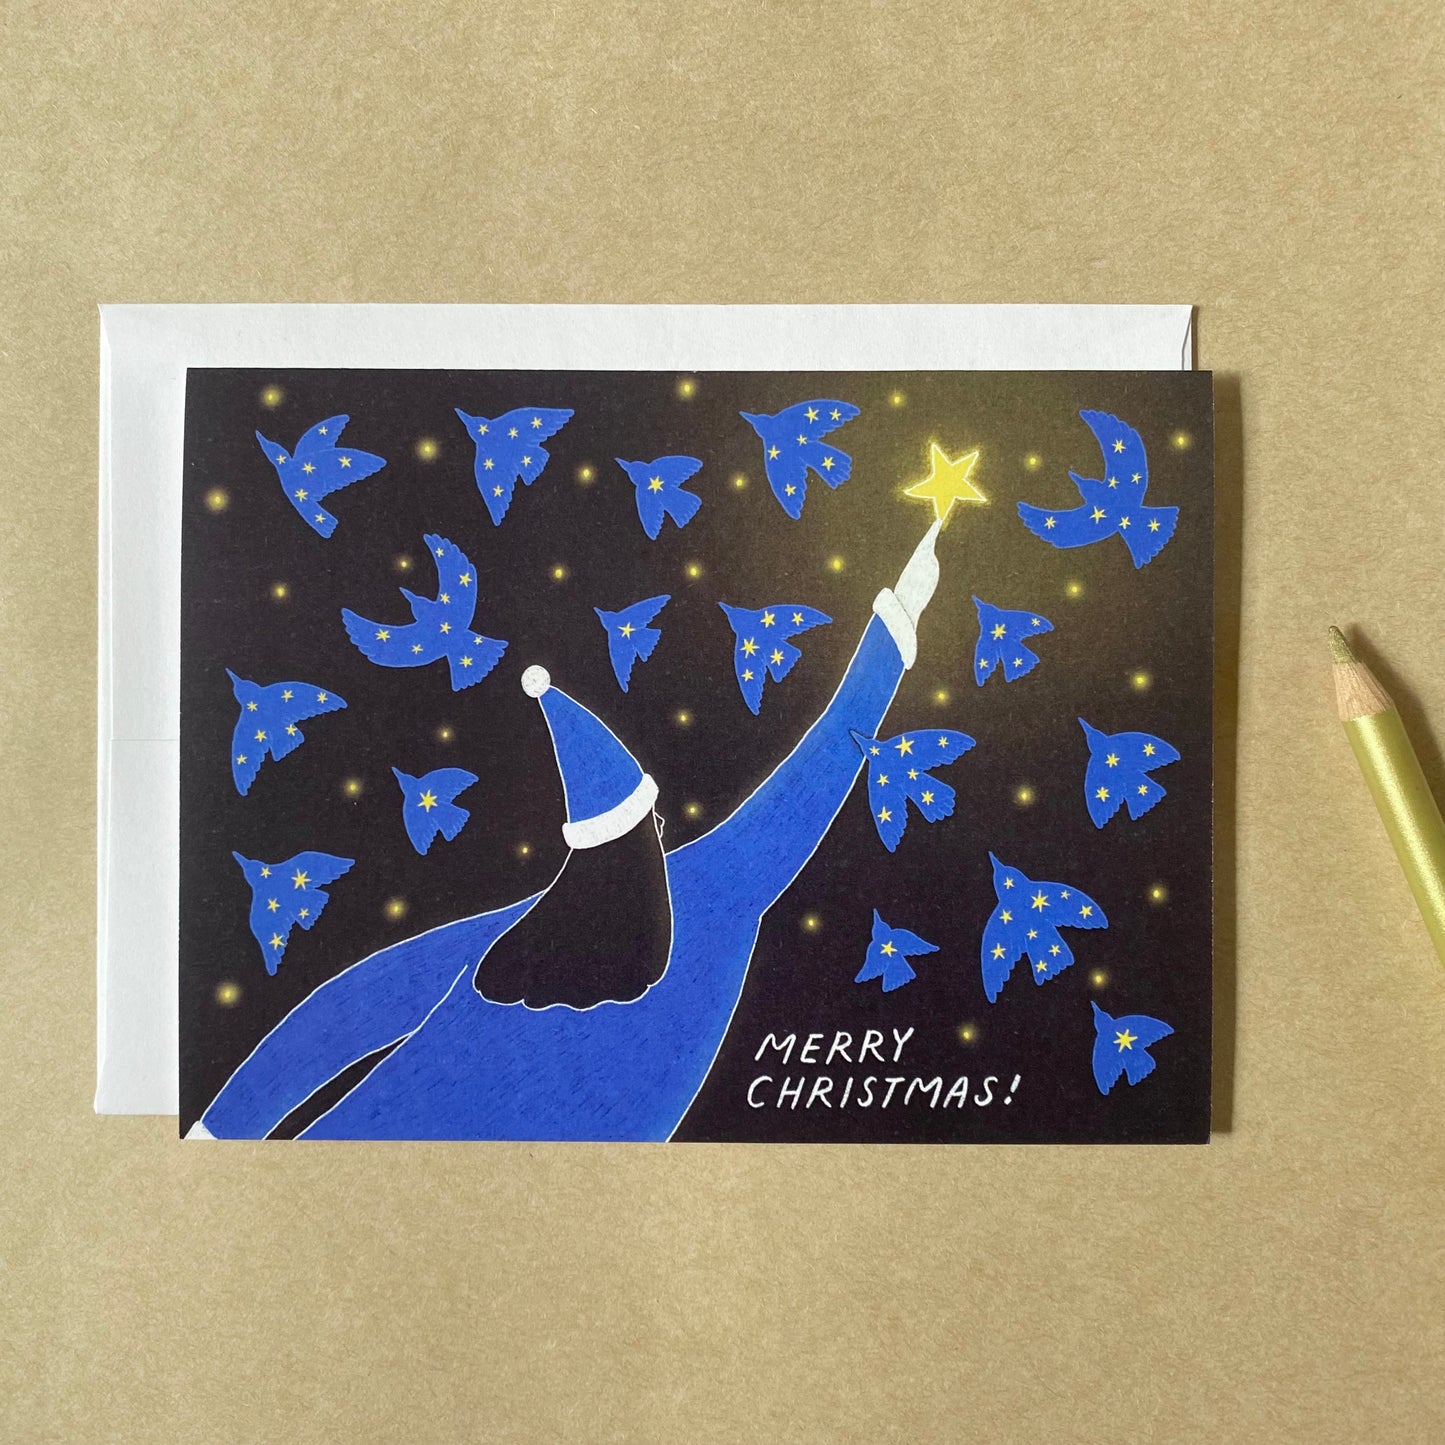 Dreamy holiday cards with the illustration of lots of birds flying with the starry sky in their bodies and the woman Santa Claus reaching out to one of the stars